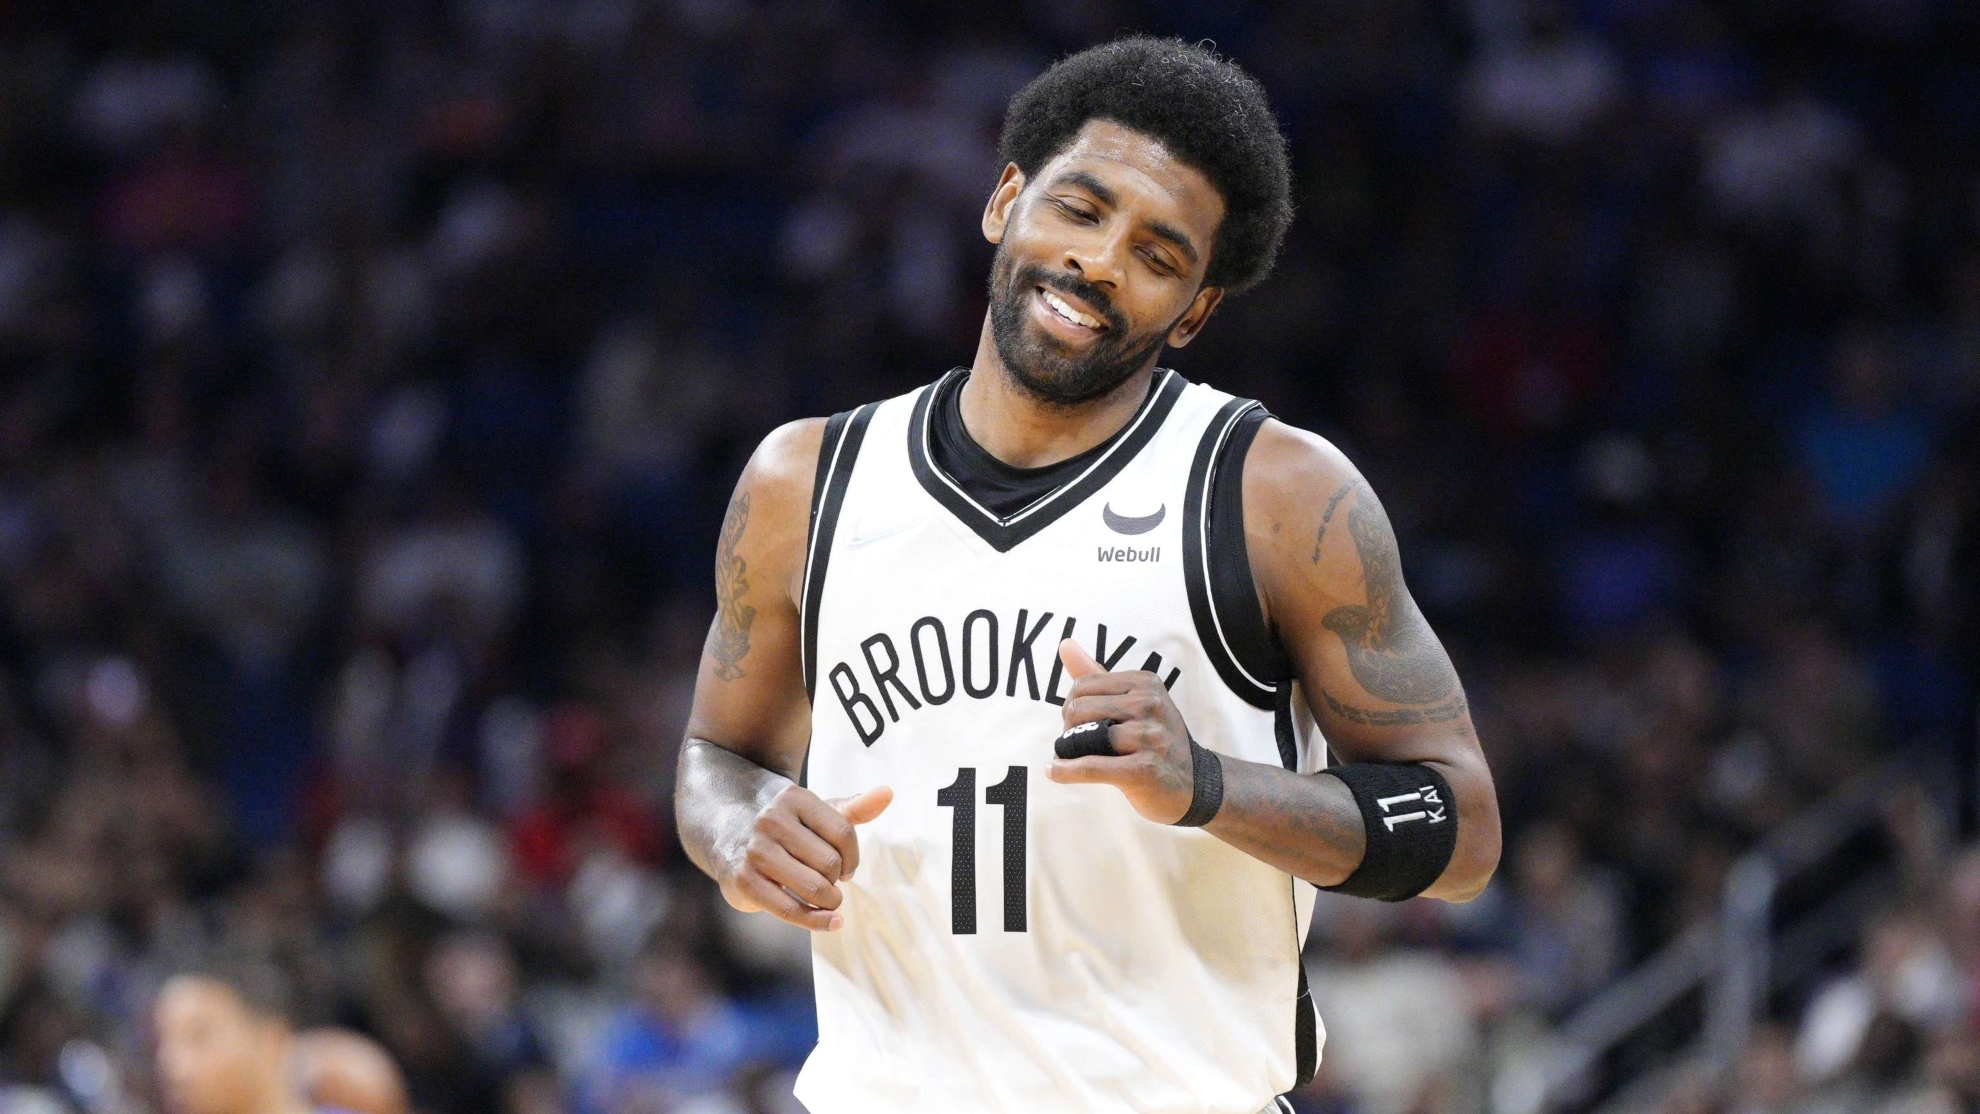 Kyrie Irving can now seek sign-and-trade from Brooklyn Nets